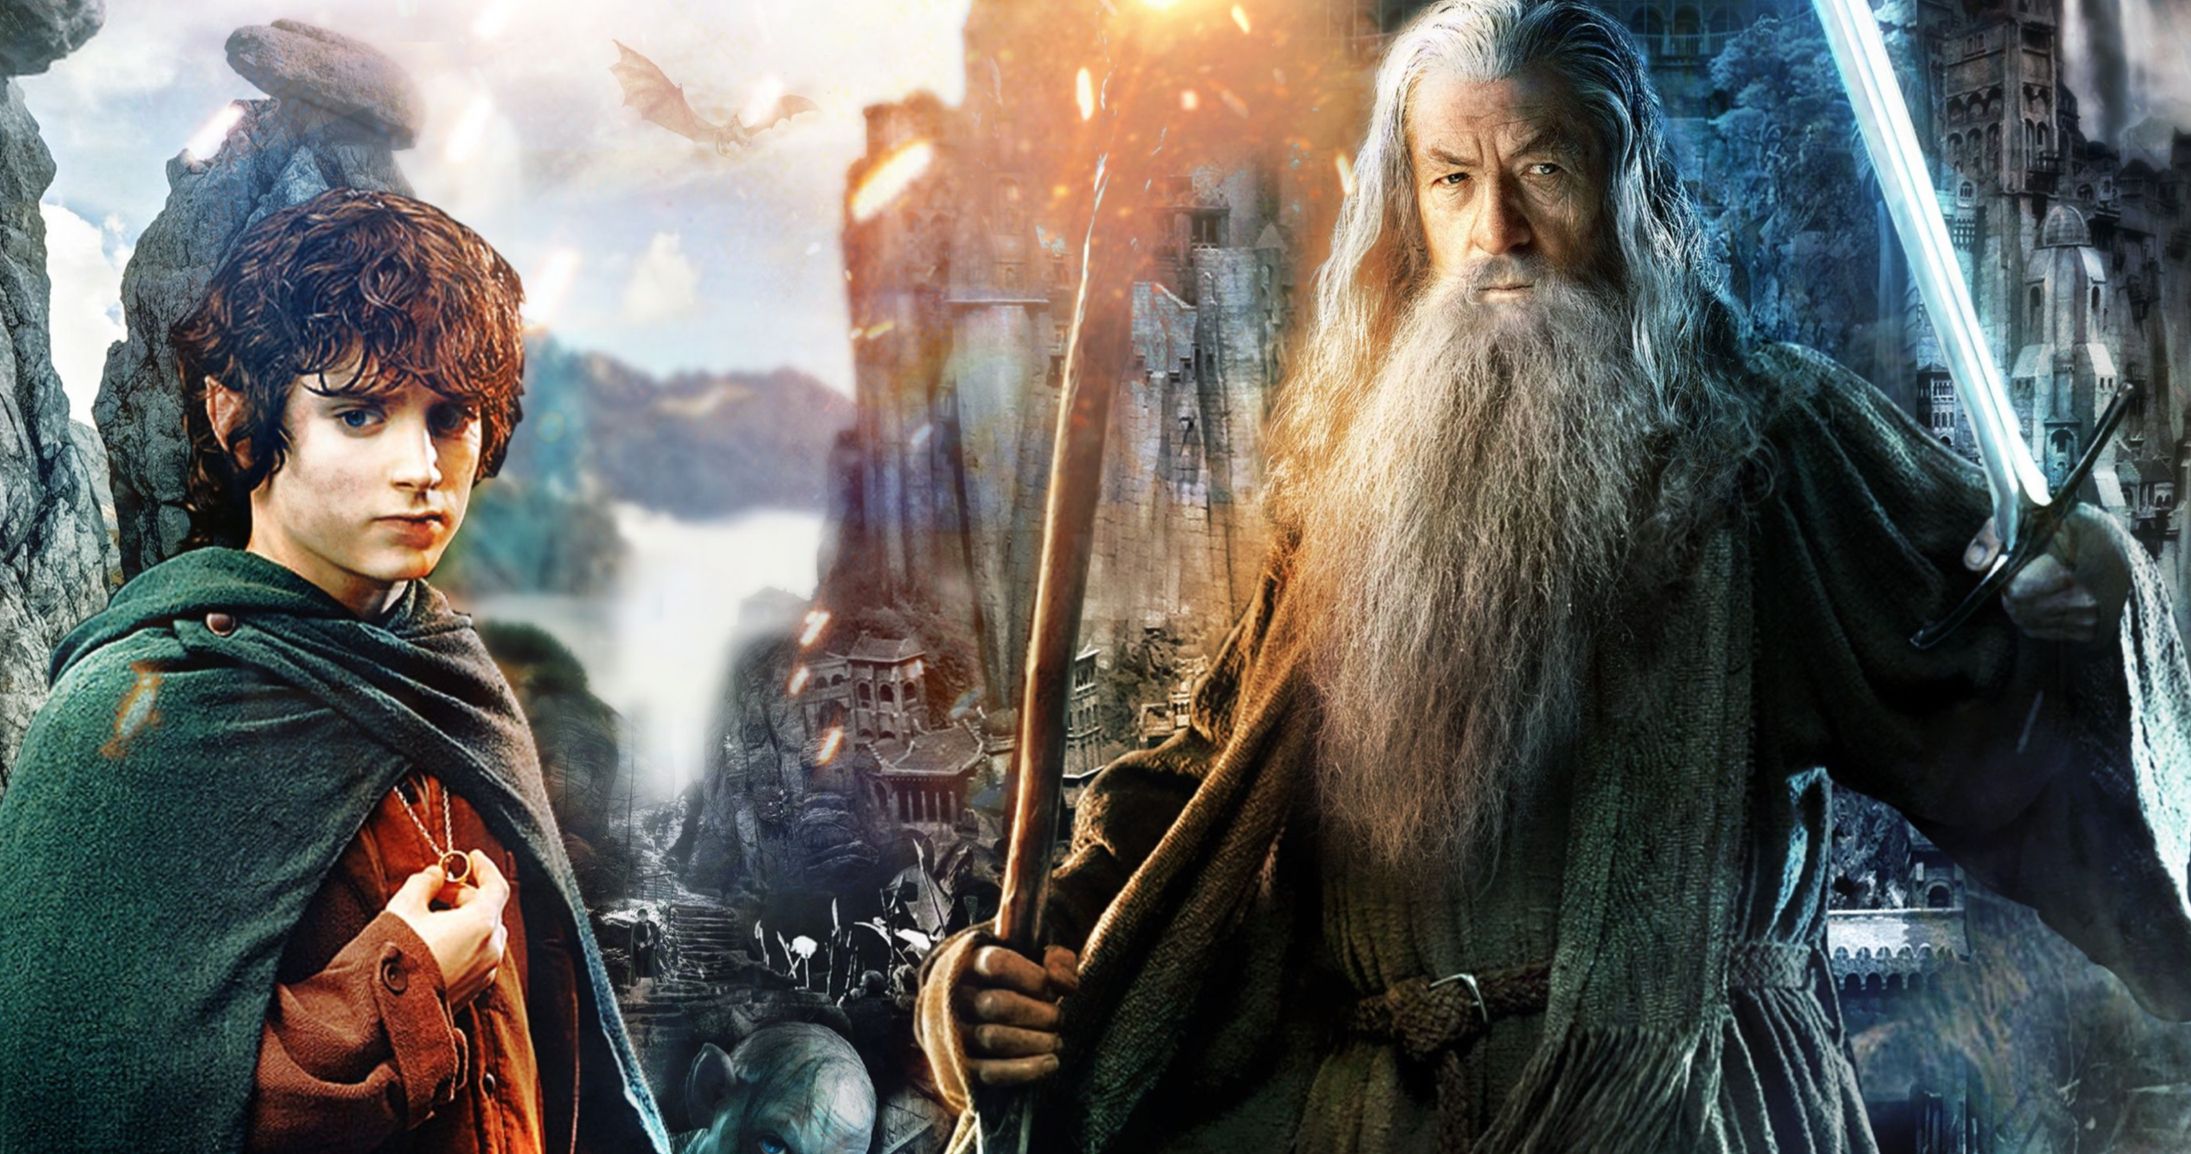 Middle-Earth Interactive Game Set Before Lord of the Rings Coming from Amazon